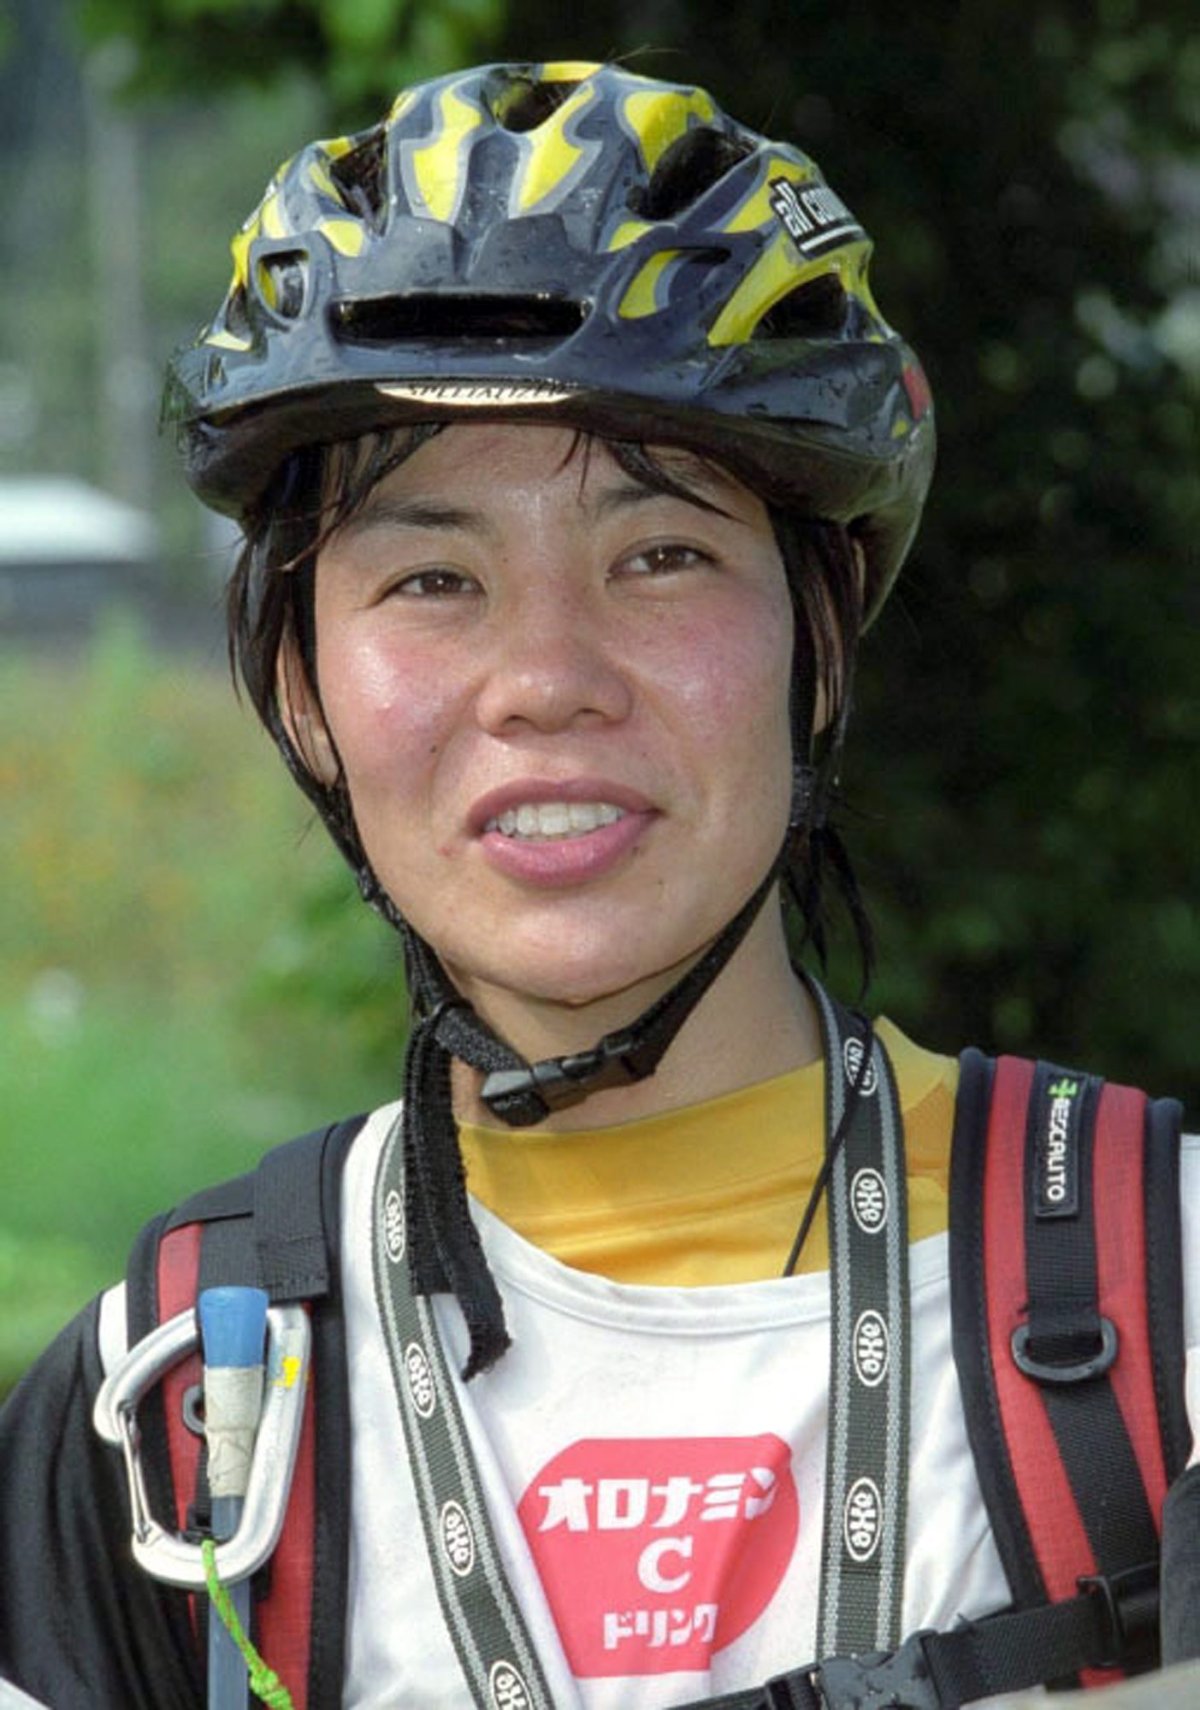 This September, 2001 photo, shows mountaineer Kei Taniguchi, who climbed Mount Everest in 2007 and became the first woman to win the prestigious Piolet d'Or (Golden Ice Axe) mountaineering award in 2009. A friend and fellow climber, Hiroshi Hagiwara, said Friday, Dec. 25, 2015 that she fell while taking a break on 1,984 meter (6,510 foot)-high Kurodake as she and four companions were descending the peak. Taniguchi died in the accident this week while climbing in the snowy Daisetsuzan range in northern Japan's Hokkaido. She was 43. 